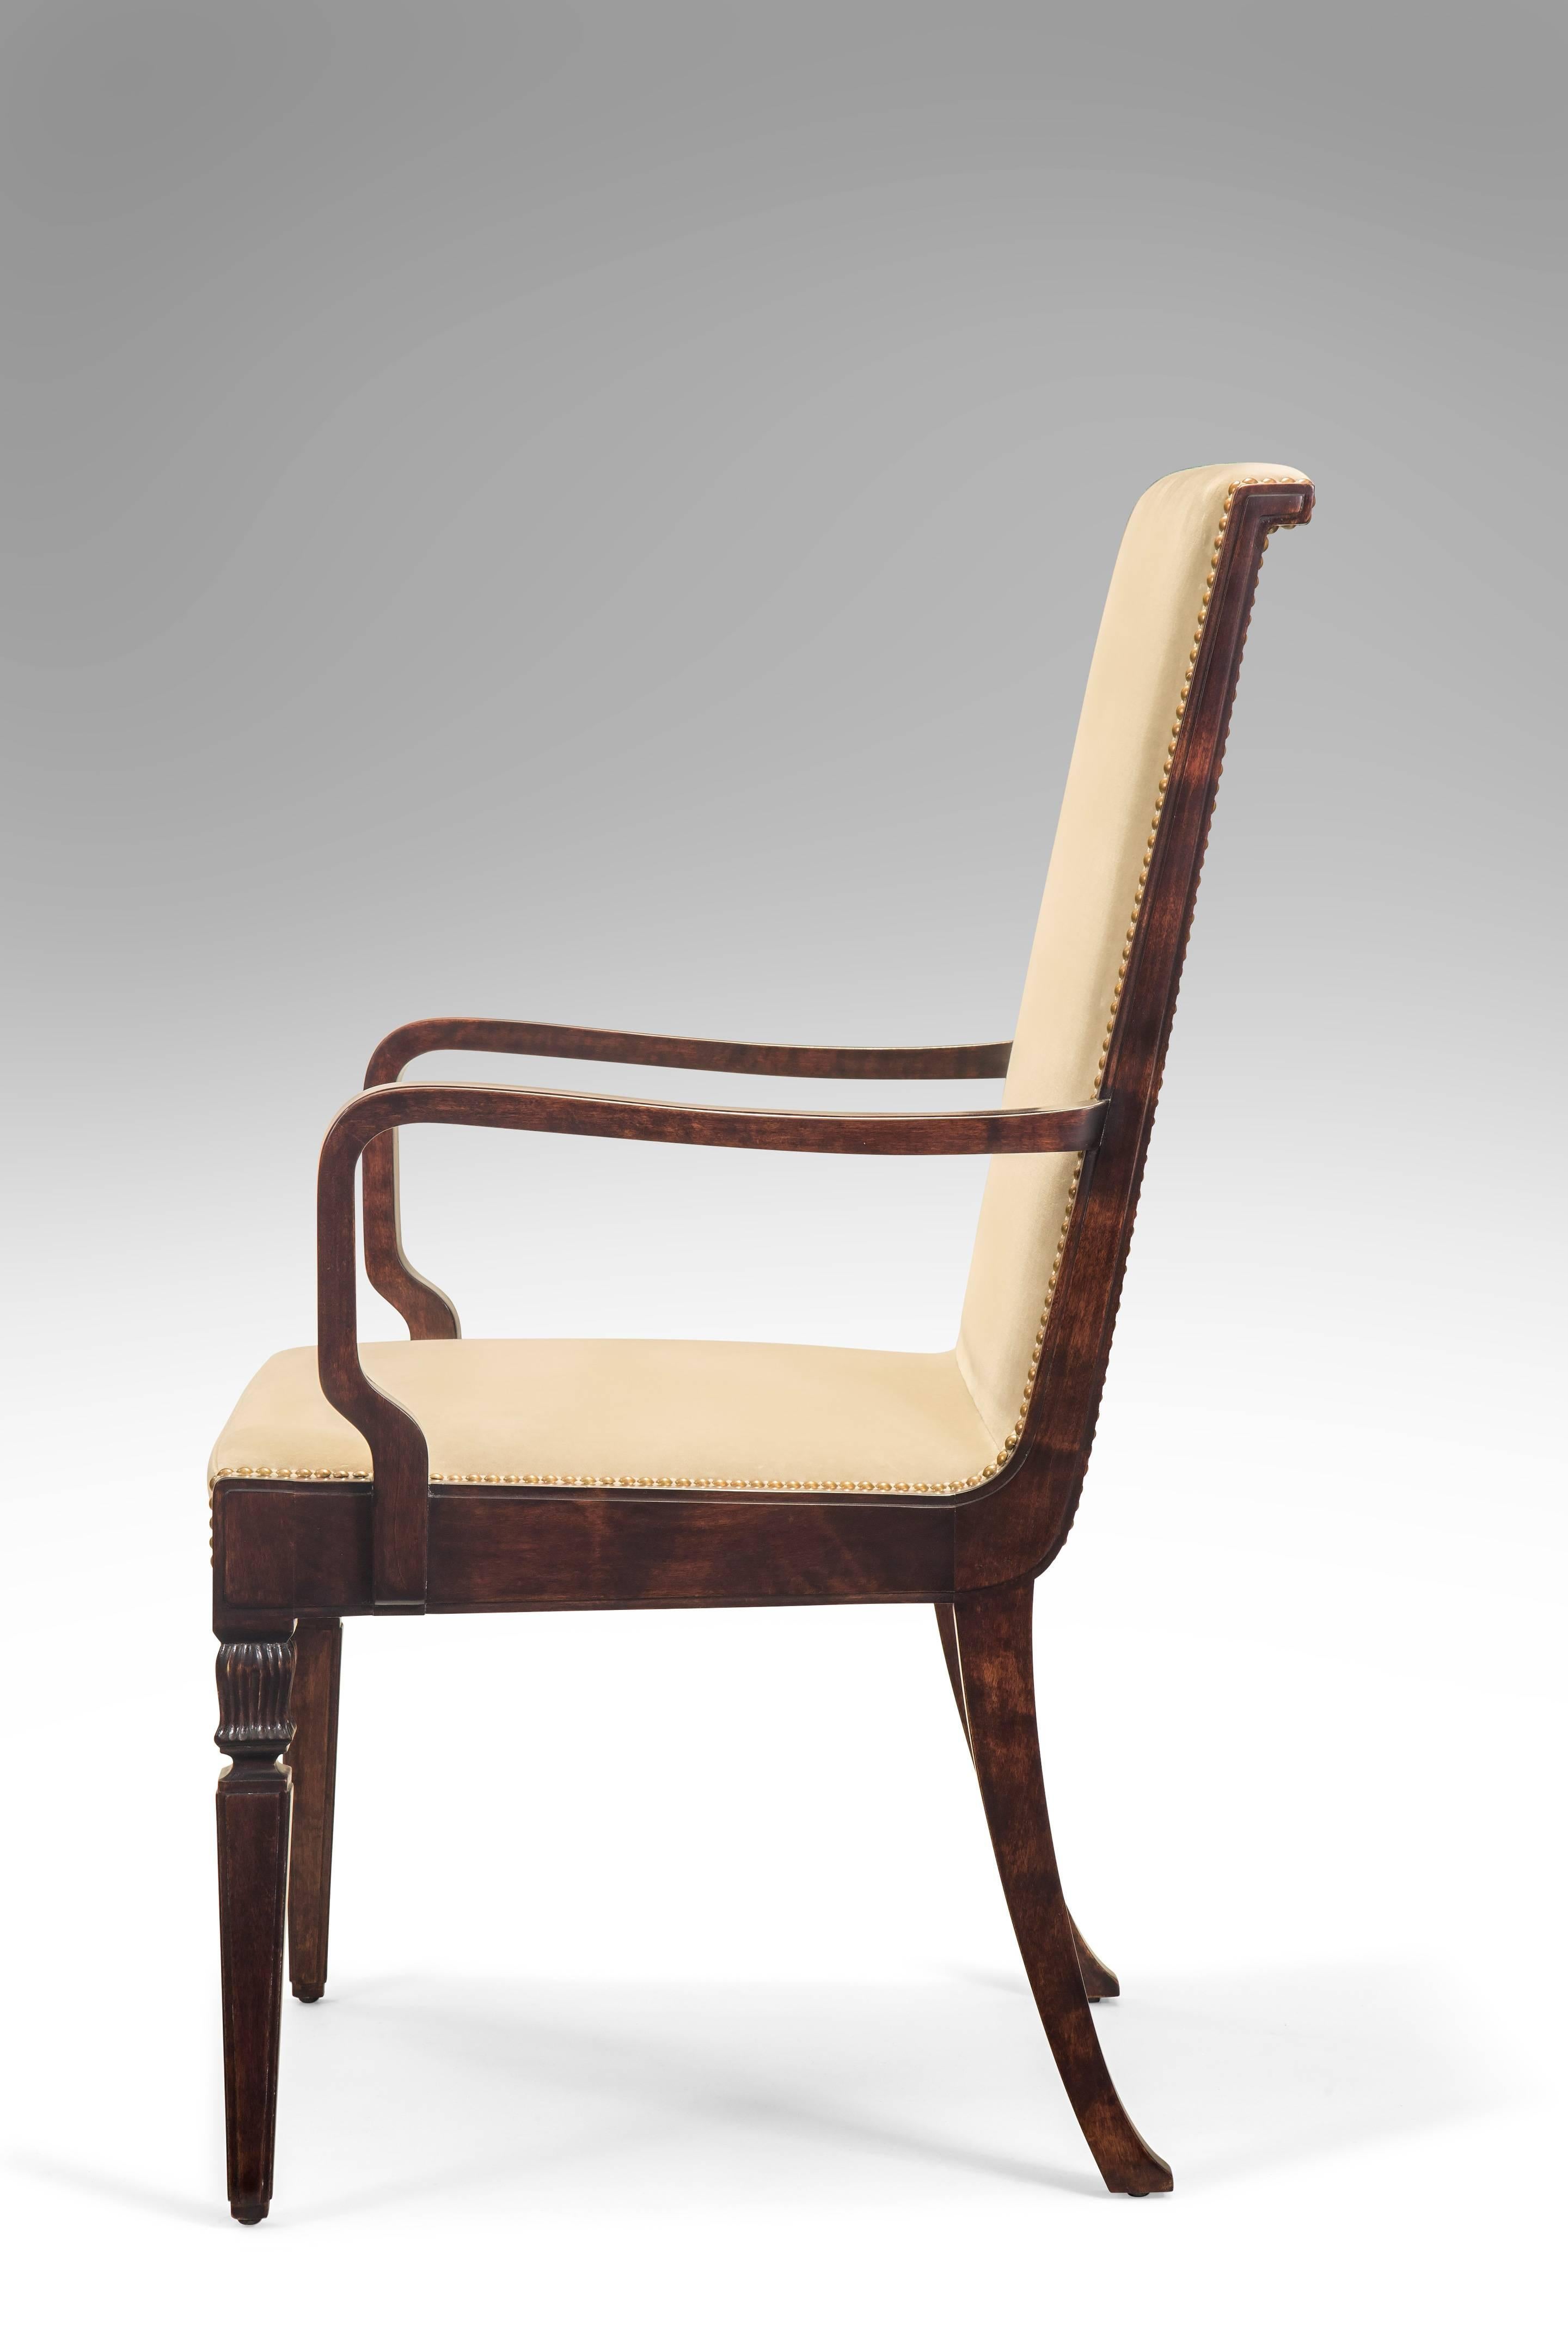 20th Century Isidor Hörlin Attributed, Large Pair of Swedish Grace Period Birch Armchairs